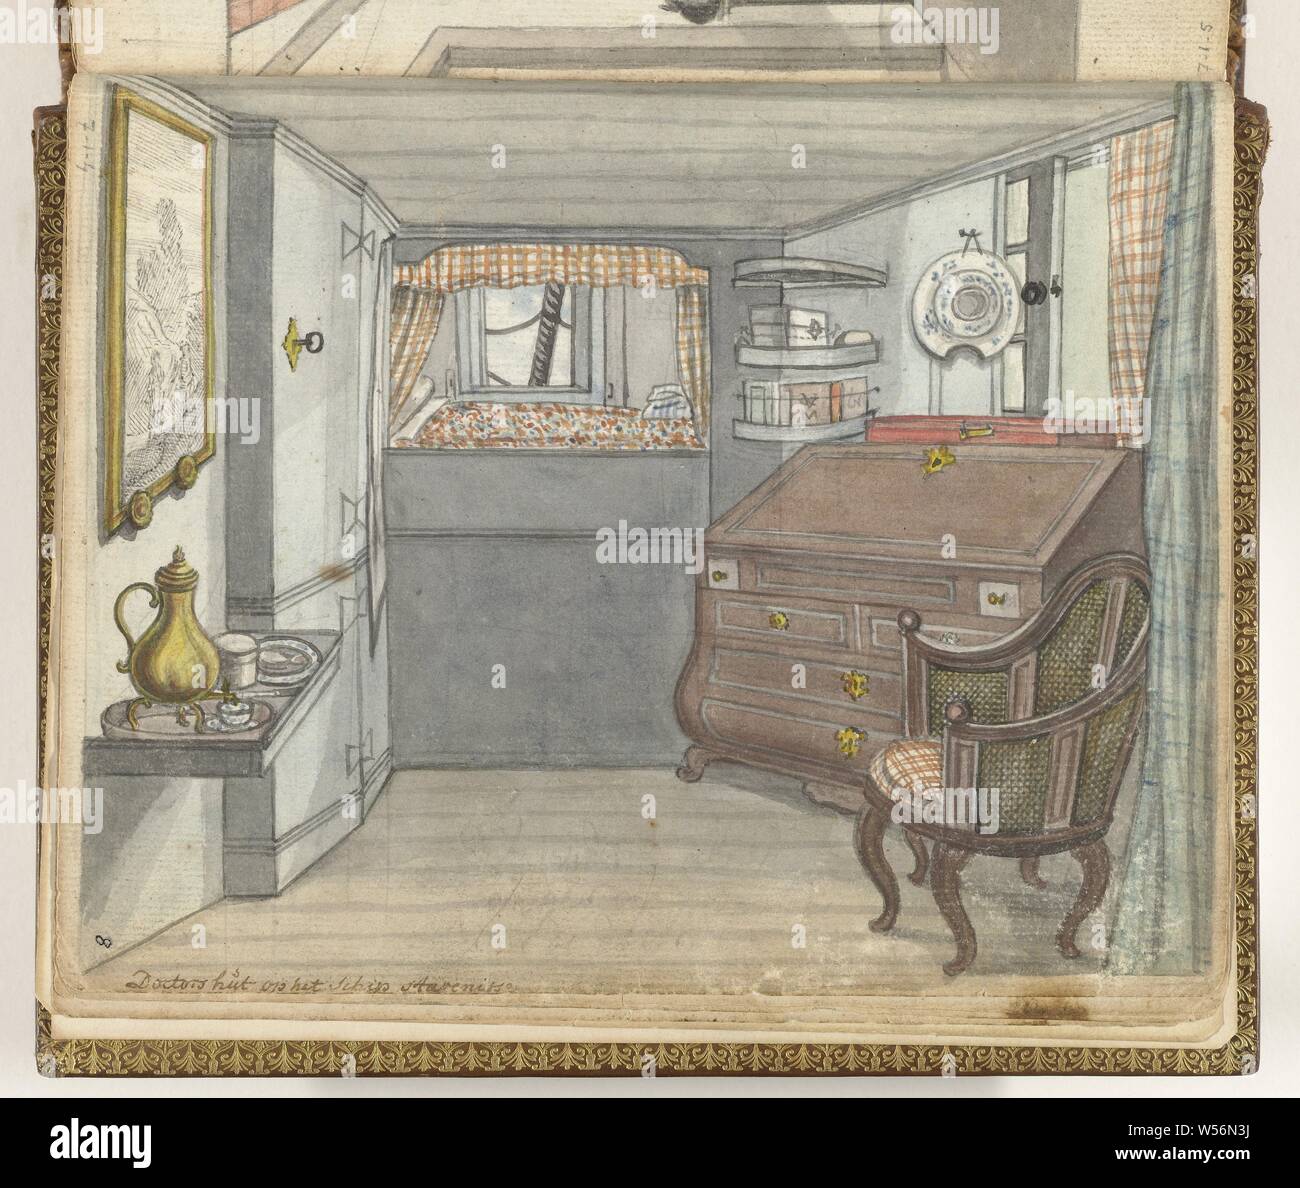 Surgeon's cabin on the VOC ship Stavenisse, Interior in moderate perspective of a ship's cabin. The far point in the drawing lies in a ship cage that is too small with bedding and fired with window curtains. A piece of mittens is visible through a porthole. The cabin is quite extensively furnished. On the left is a painting or print on the wall. Below is a coffee set. To the right is a chair for a commode. A shaving basin hangs above it. Shelves with books to the right of the cage. On one: VOCM, from the VOC Chamber Middelburg. With inscription. Part from the sketchbook by Jan Brandes, dl. 1 Stock Photo